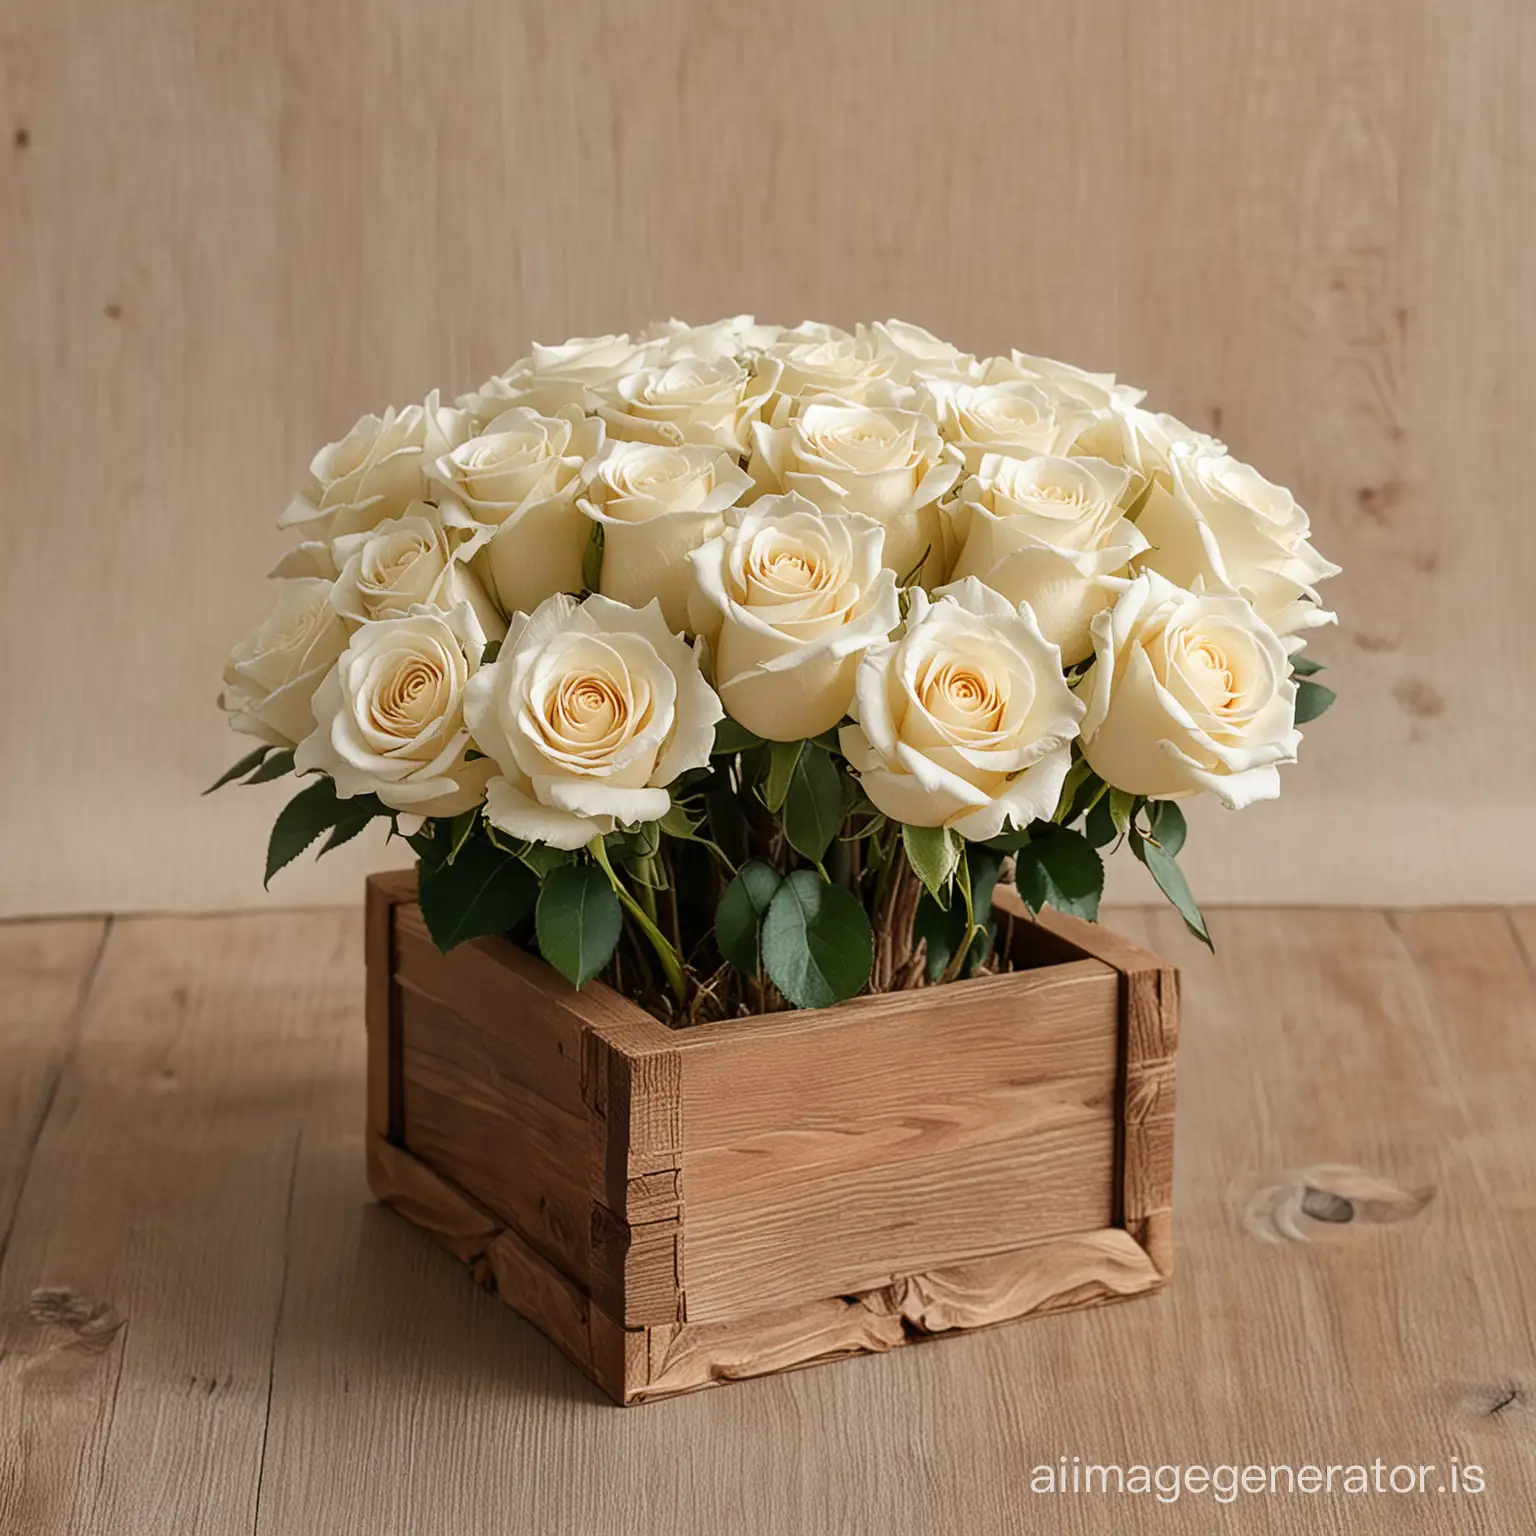 Rustic-Wedding-Centerpiece-Ivory-Roses-in-Wooden-Square-Box-Vase